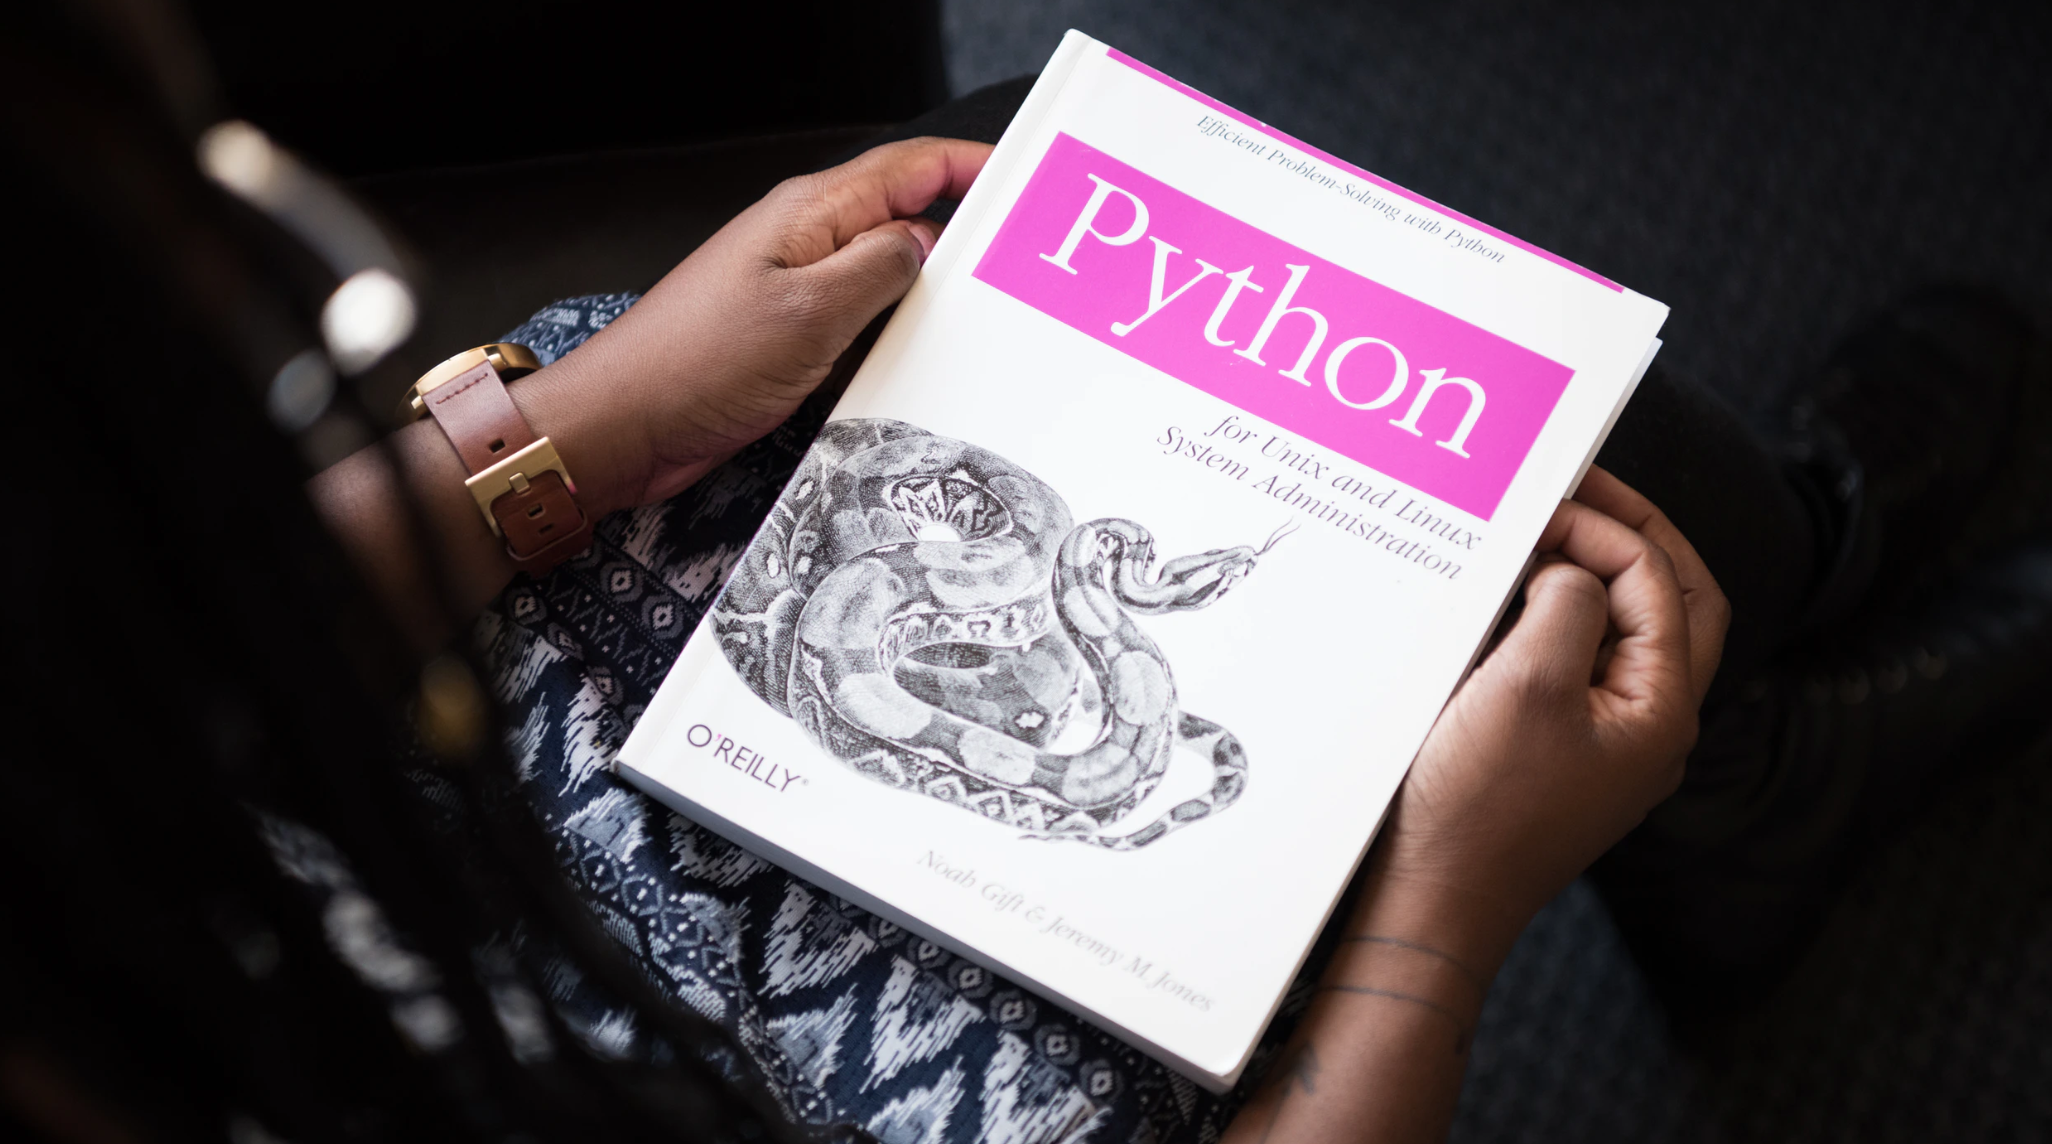 Python is one of the top programming languages of 2020